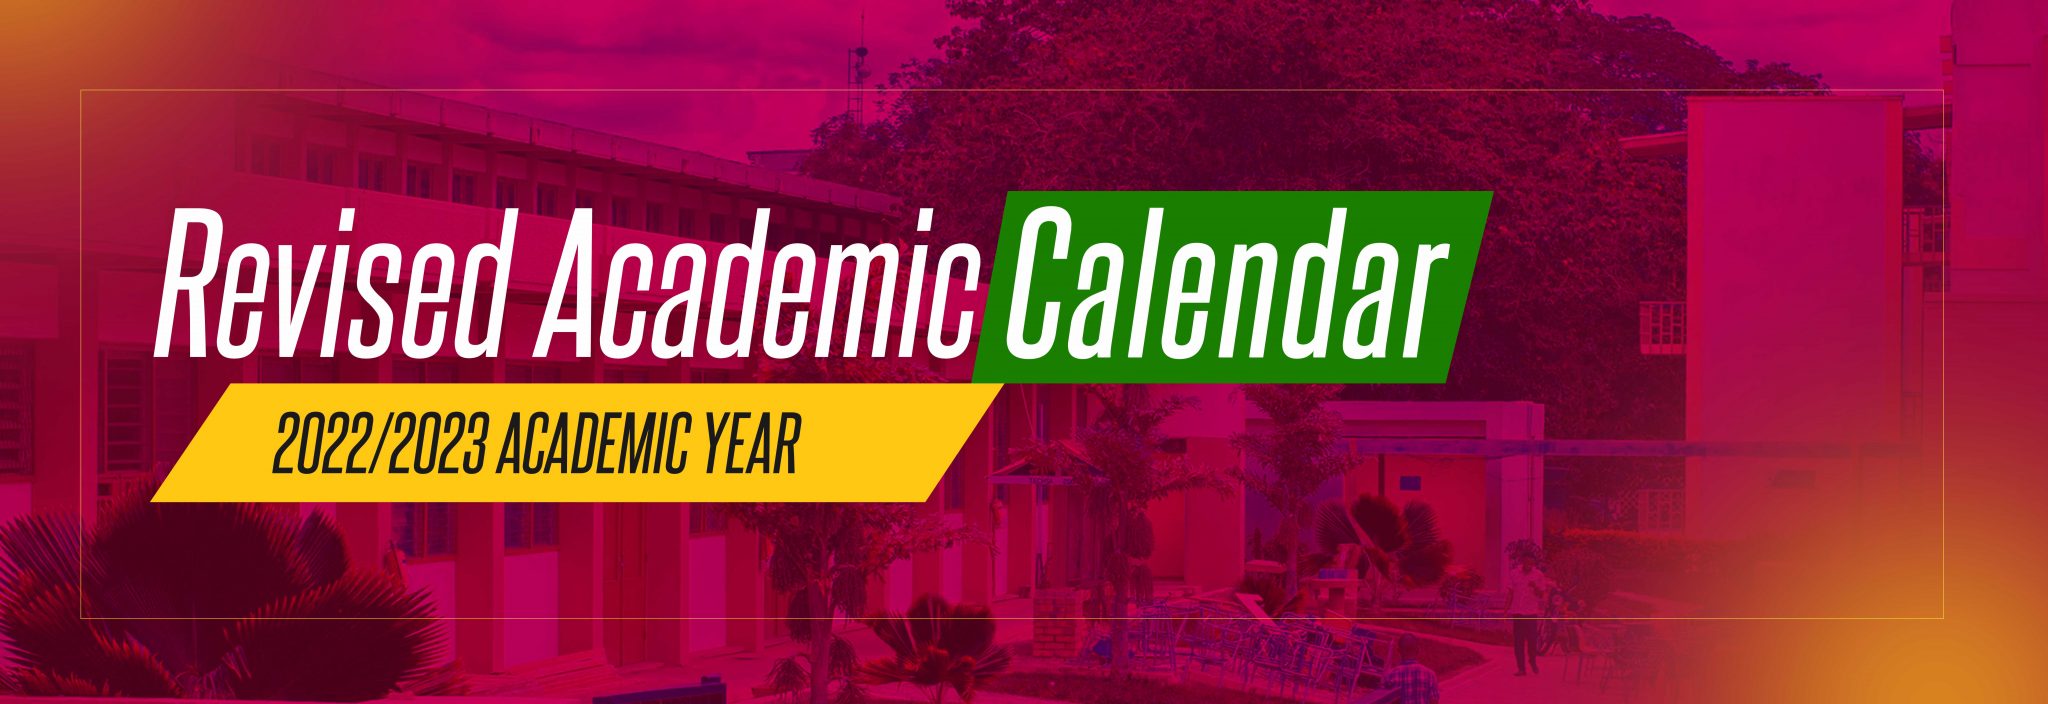 Revised Academic Calendar for AAMUSTED 2022/2023 Academic Year AAMUSTED